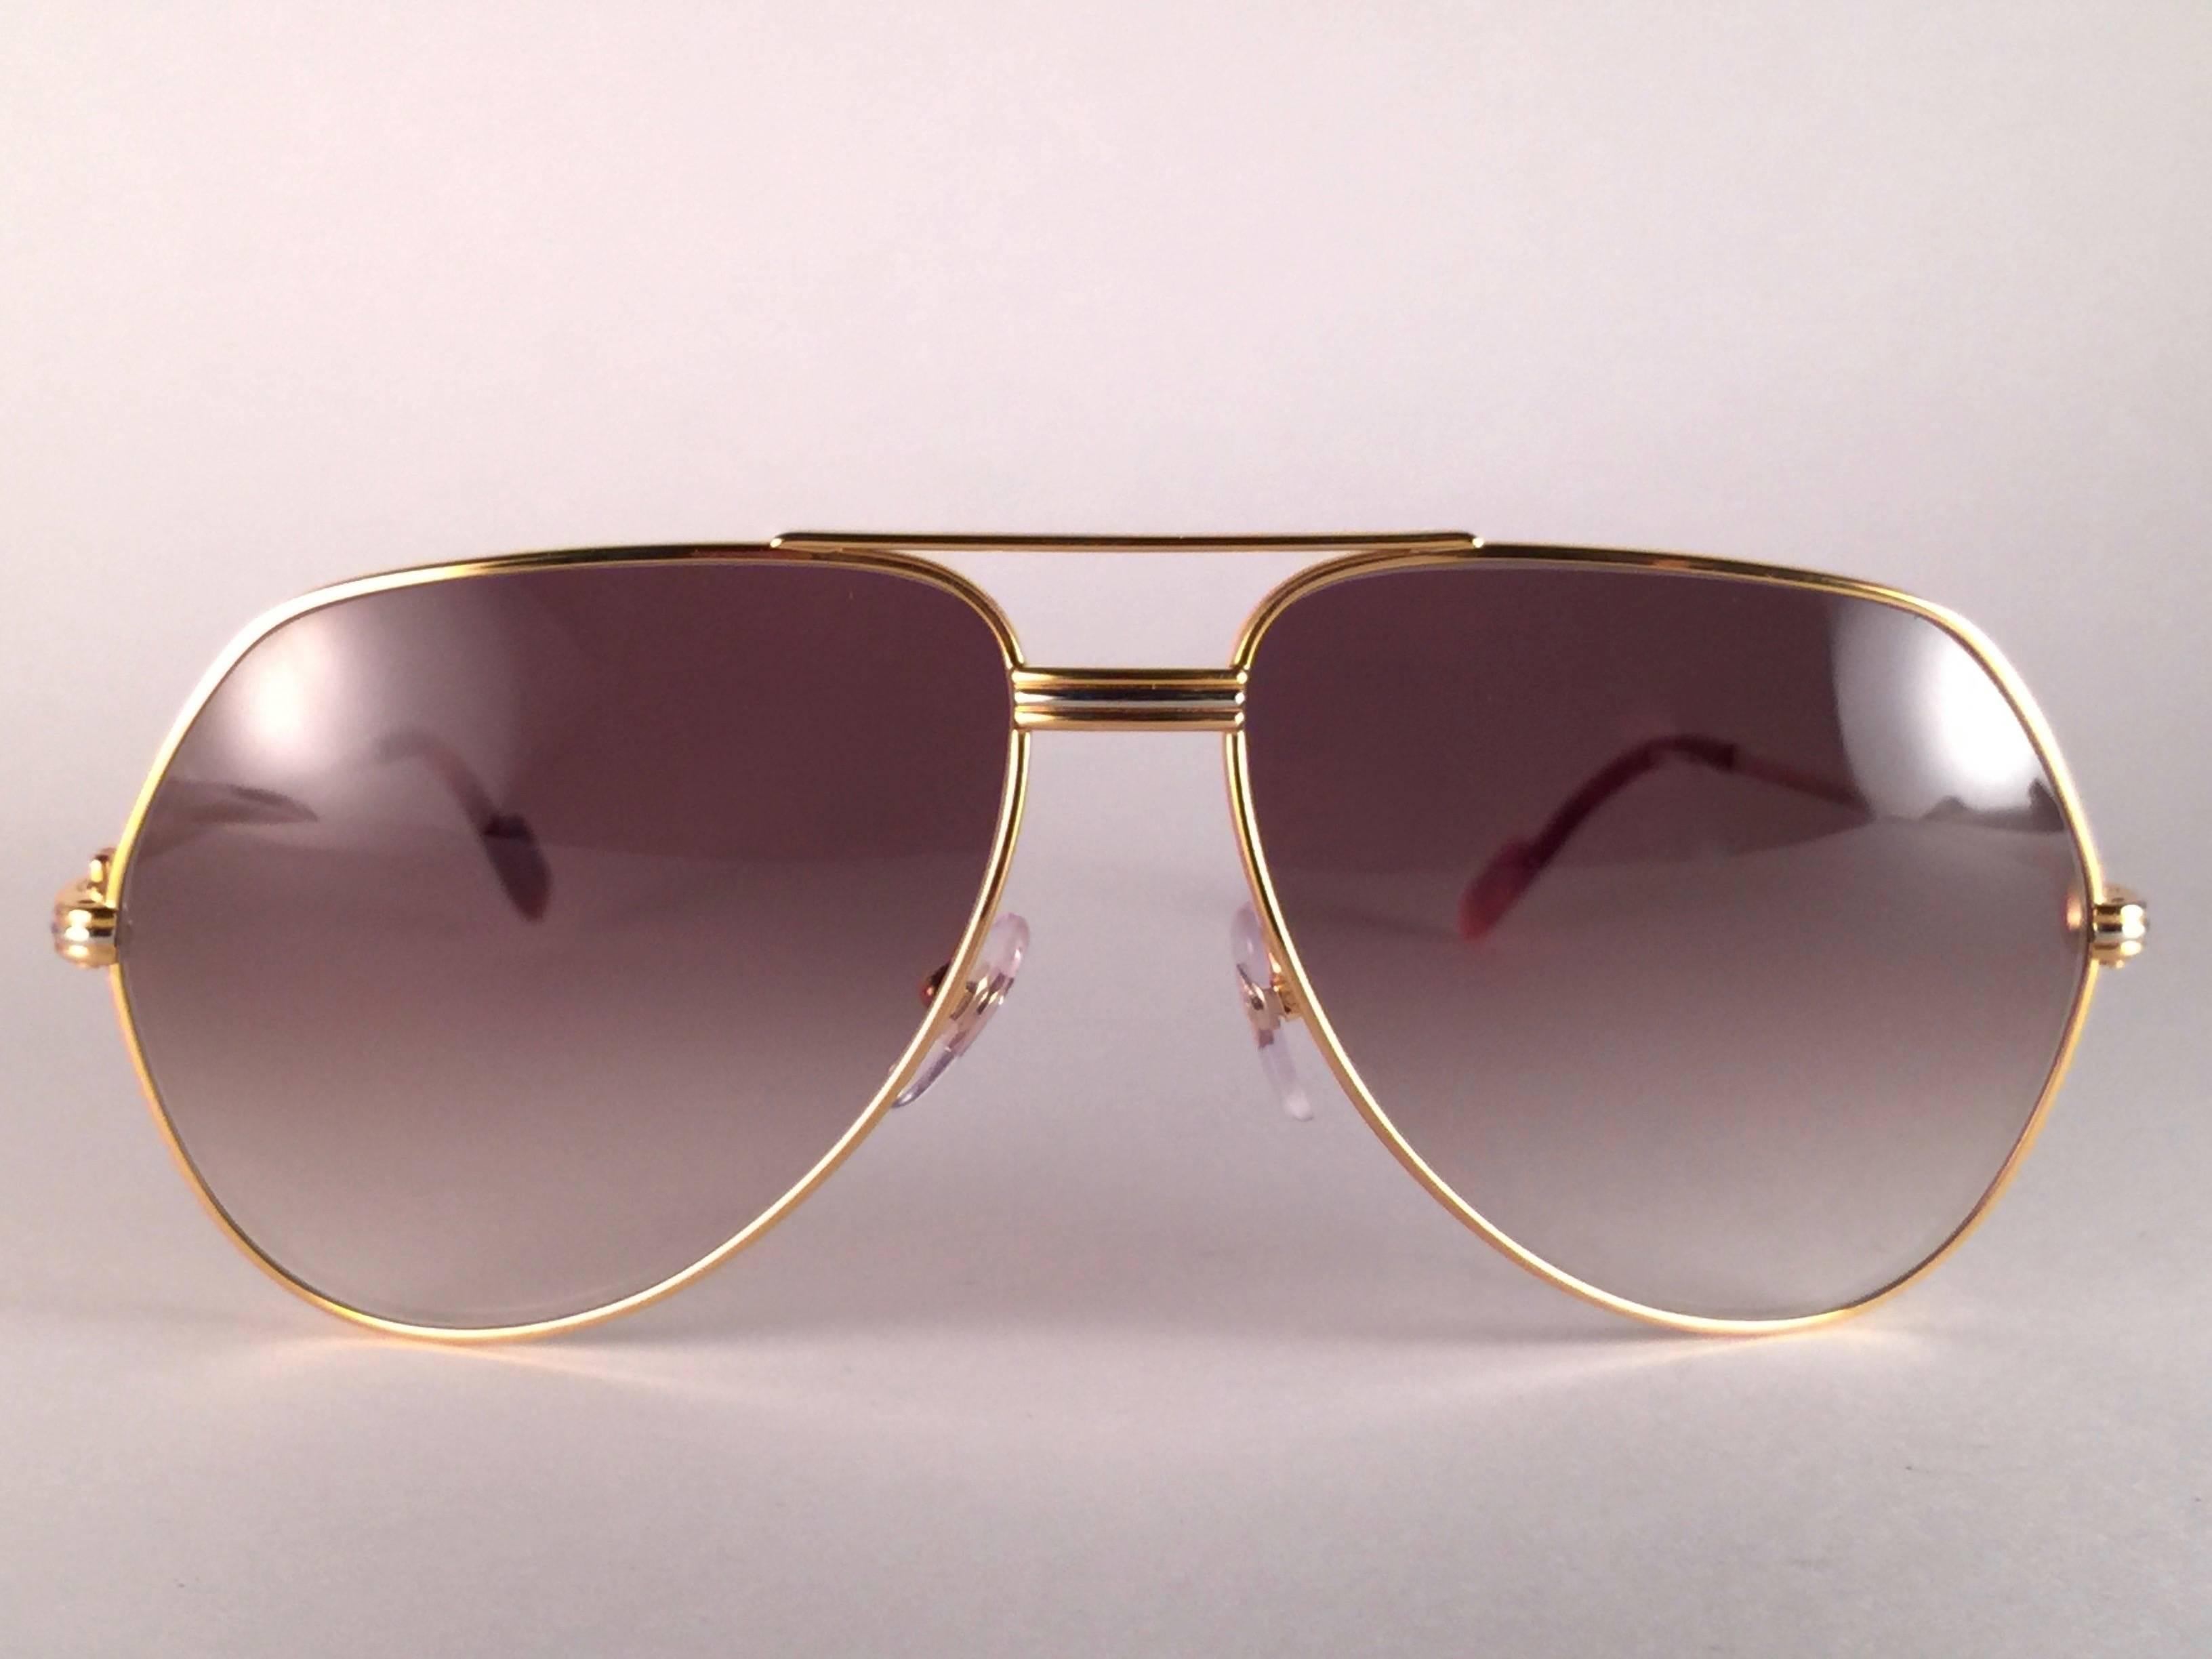 New from 1983!!! Cartier Aviator Vendome 62MM Heavy plated gold sunglasses with brown  (uv protection) Lenses.  Frame is with the famous Vendome stripes on the front and sides in yellow and white gold. 
All hallmarks. 
Red enamel with Cartier gold